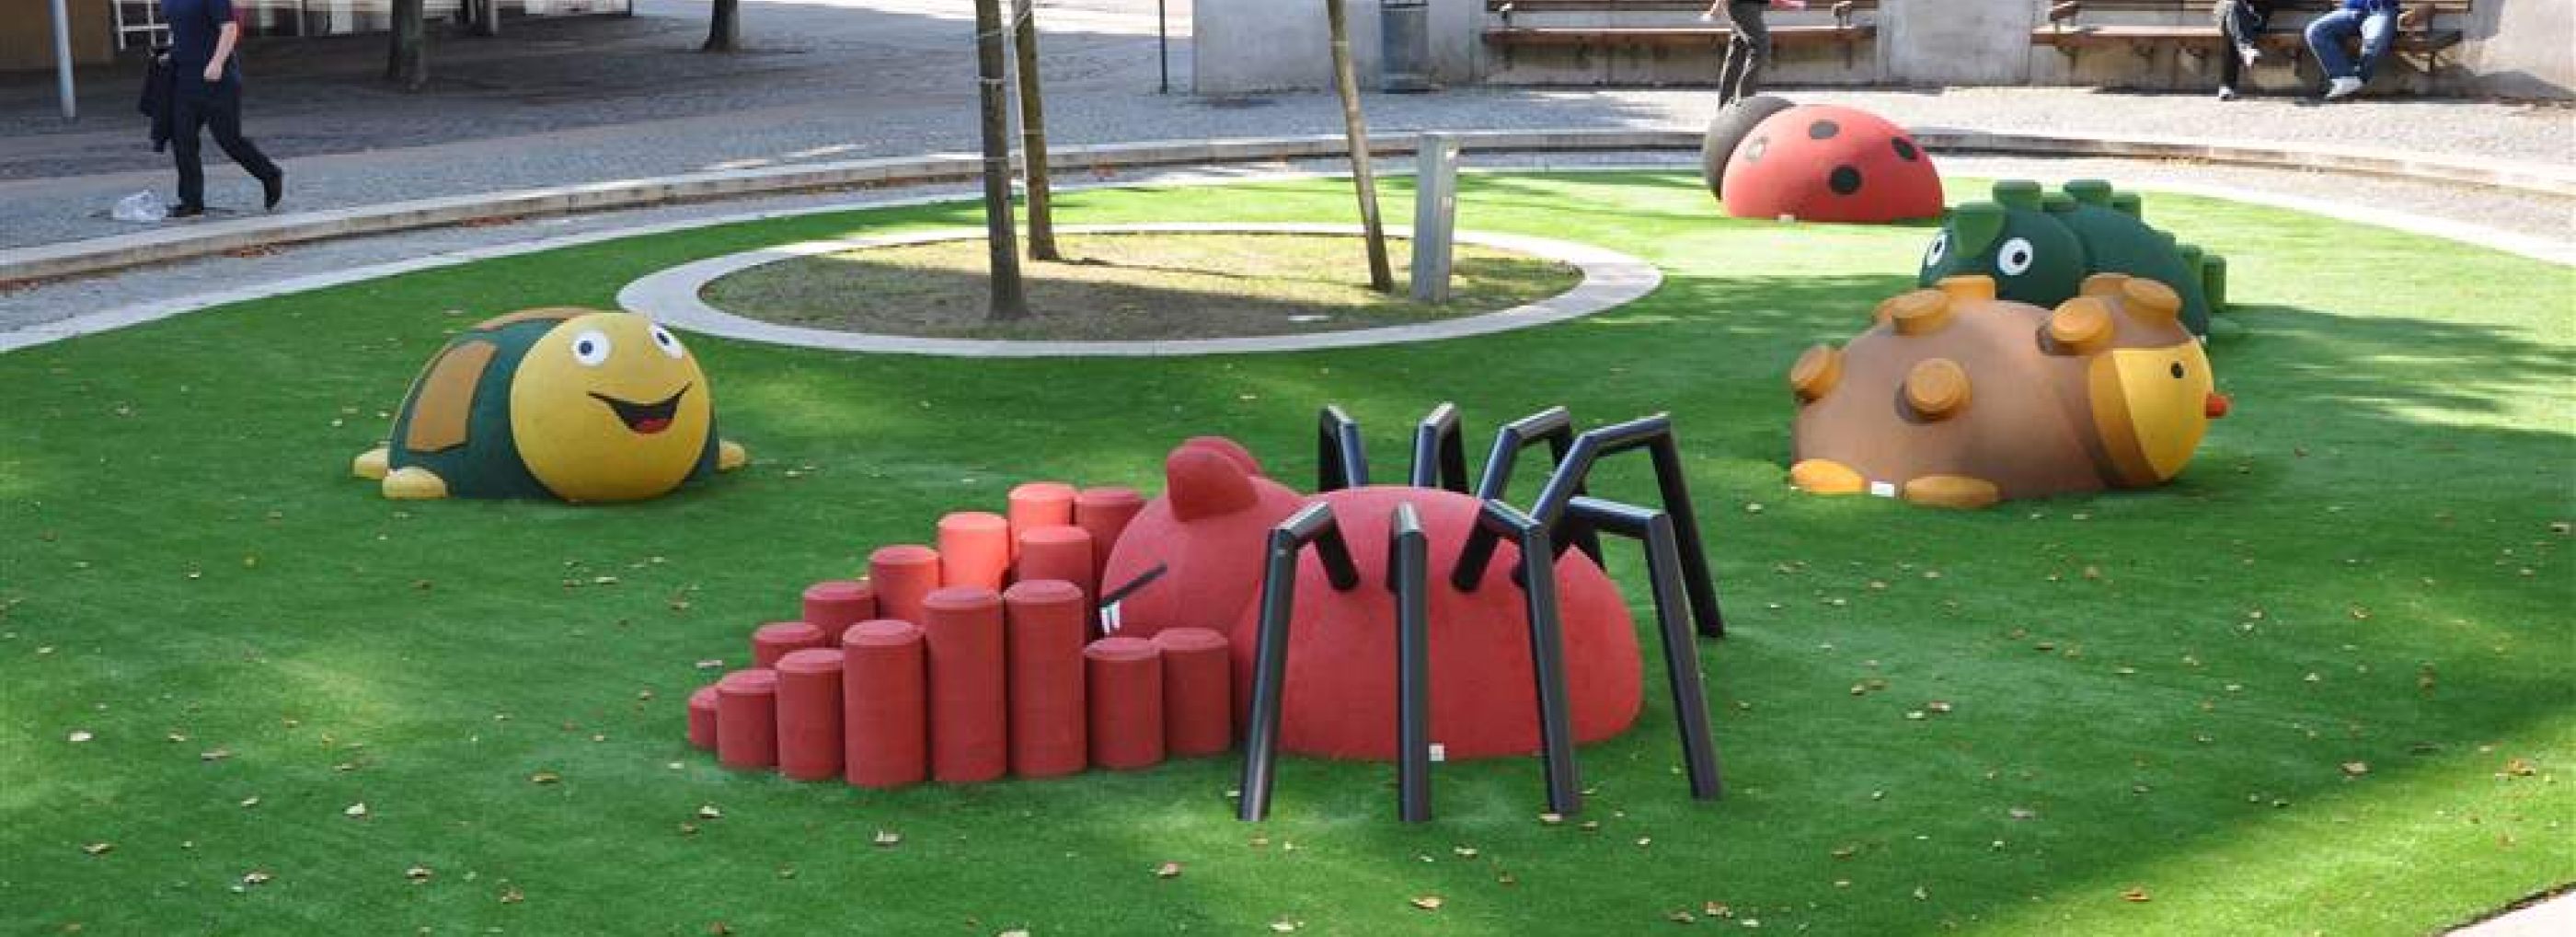 Outdoor playground with a range of 3D play animals including a spider, ladybird and reptile.